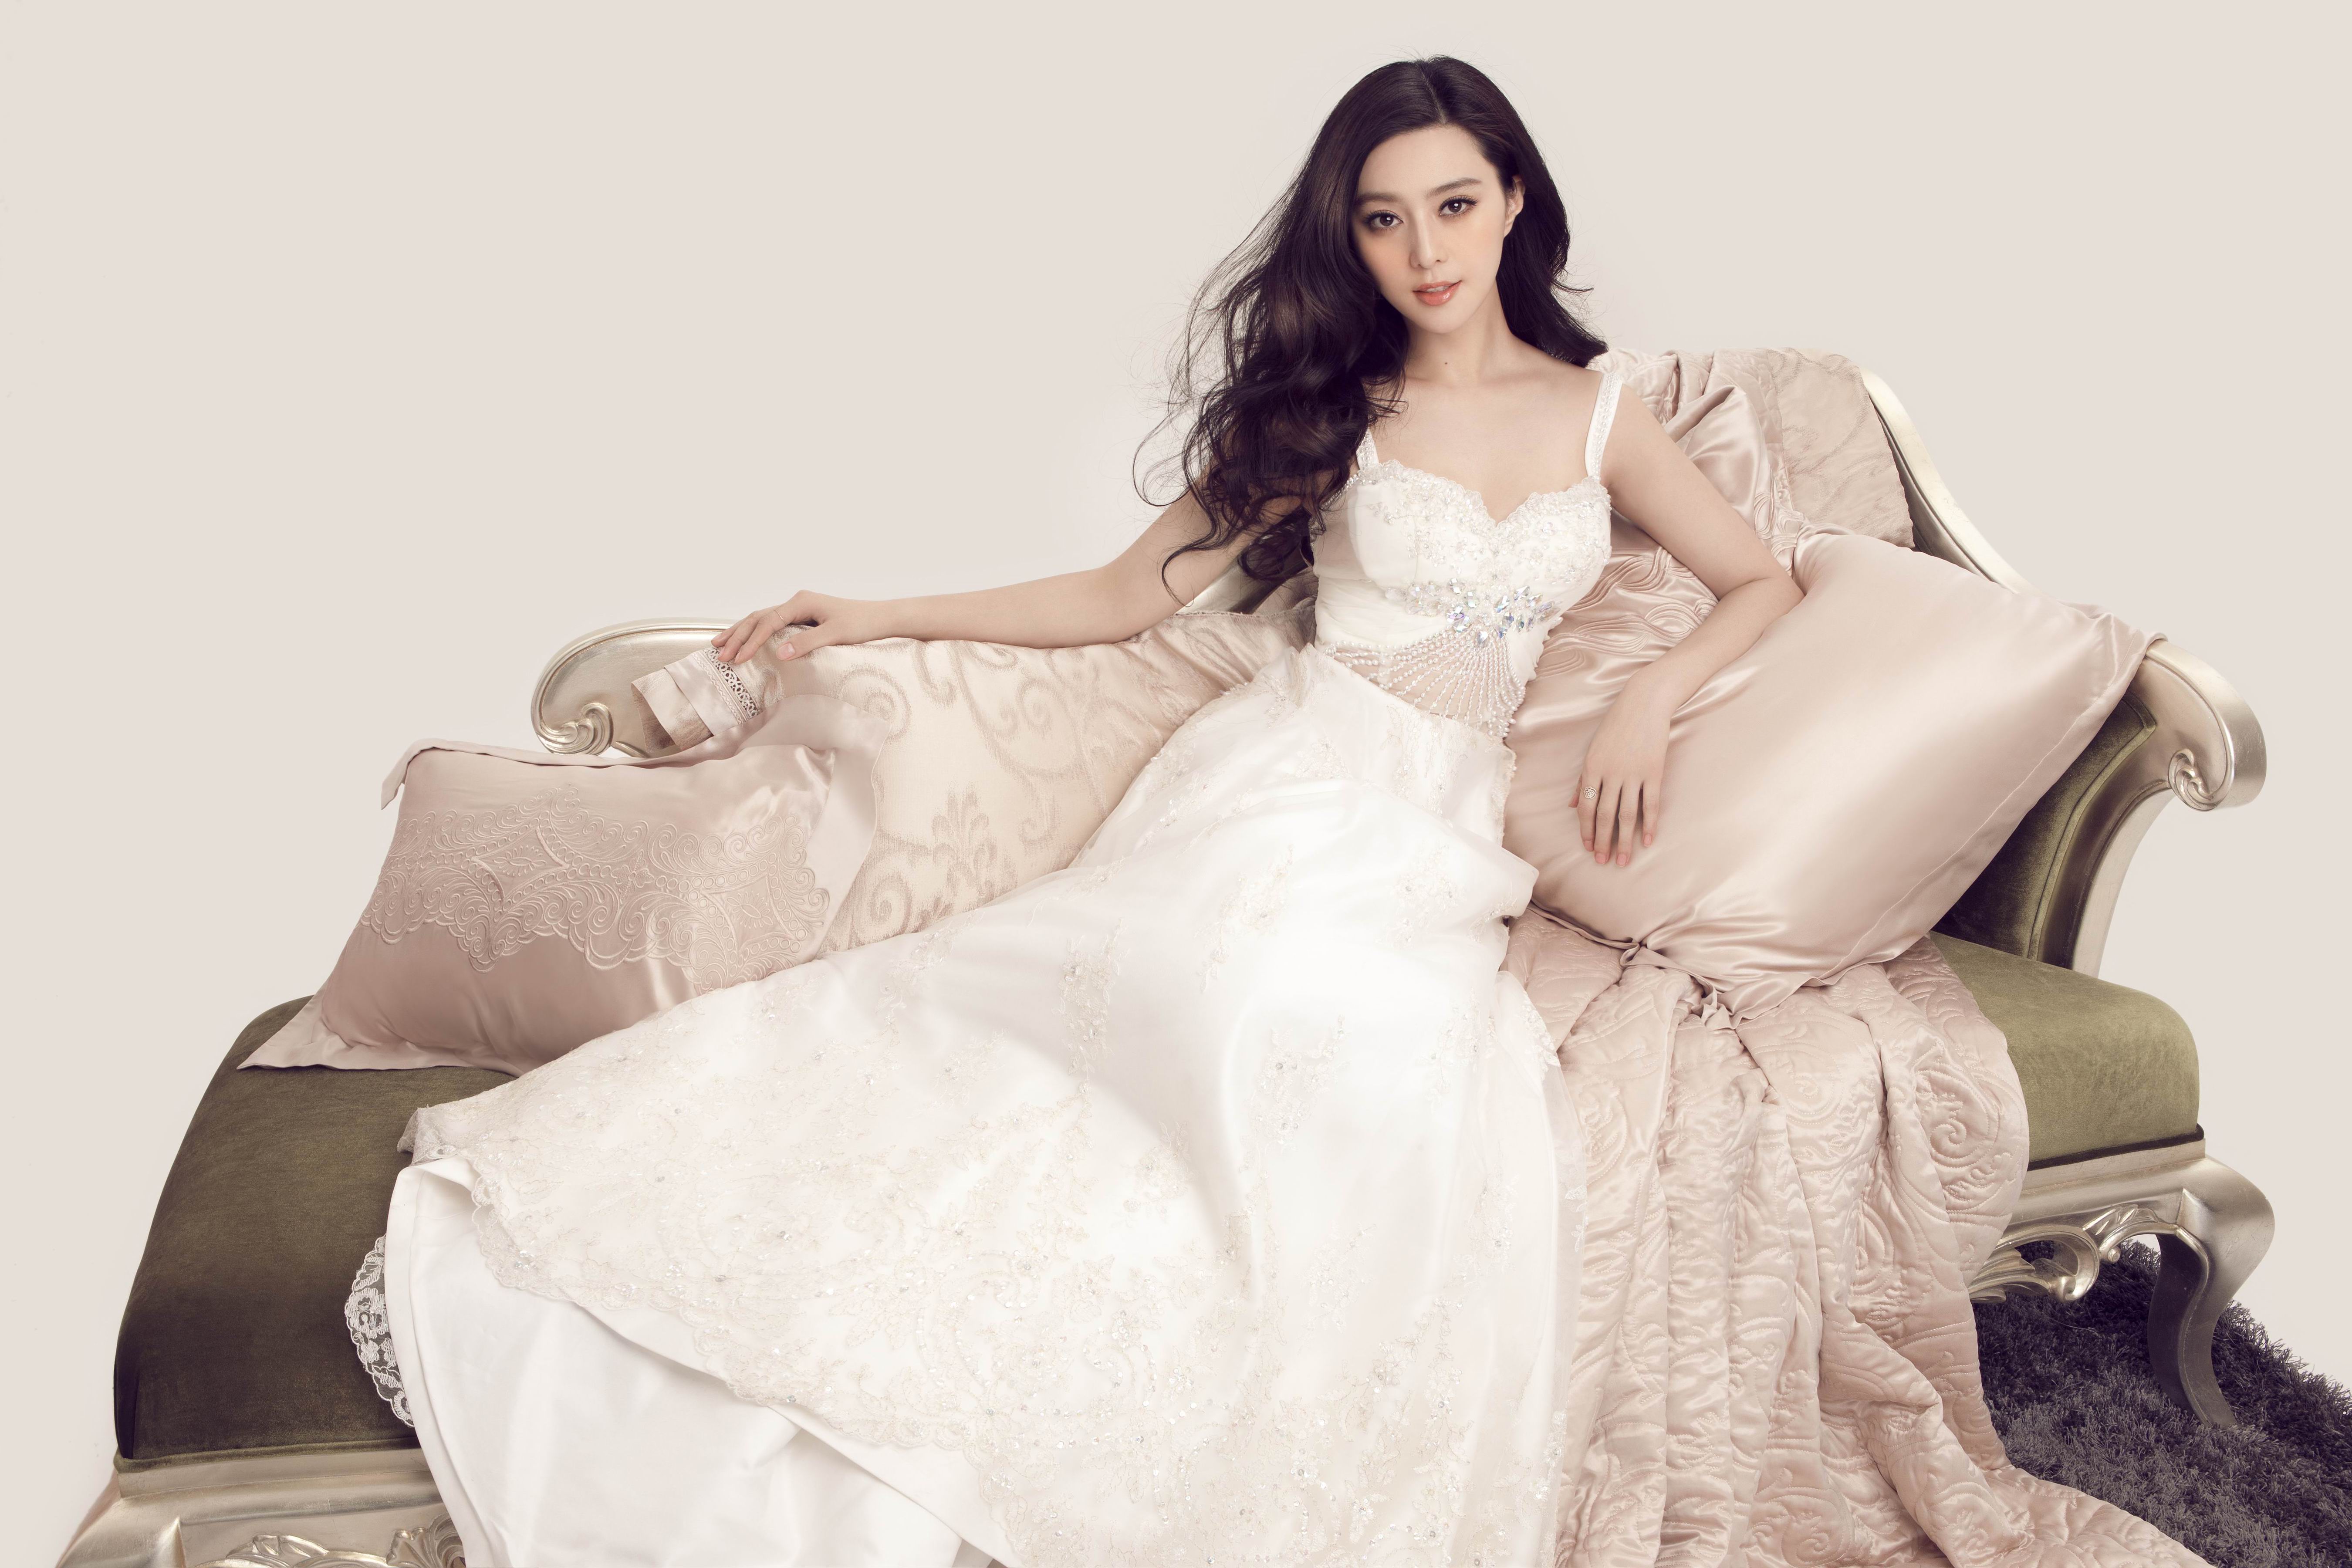 celebrity, fan bingbing, actress, chinese, couch, dress, sofa